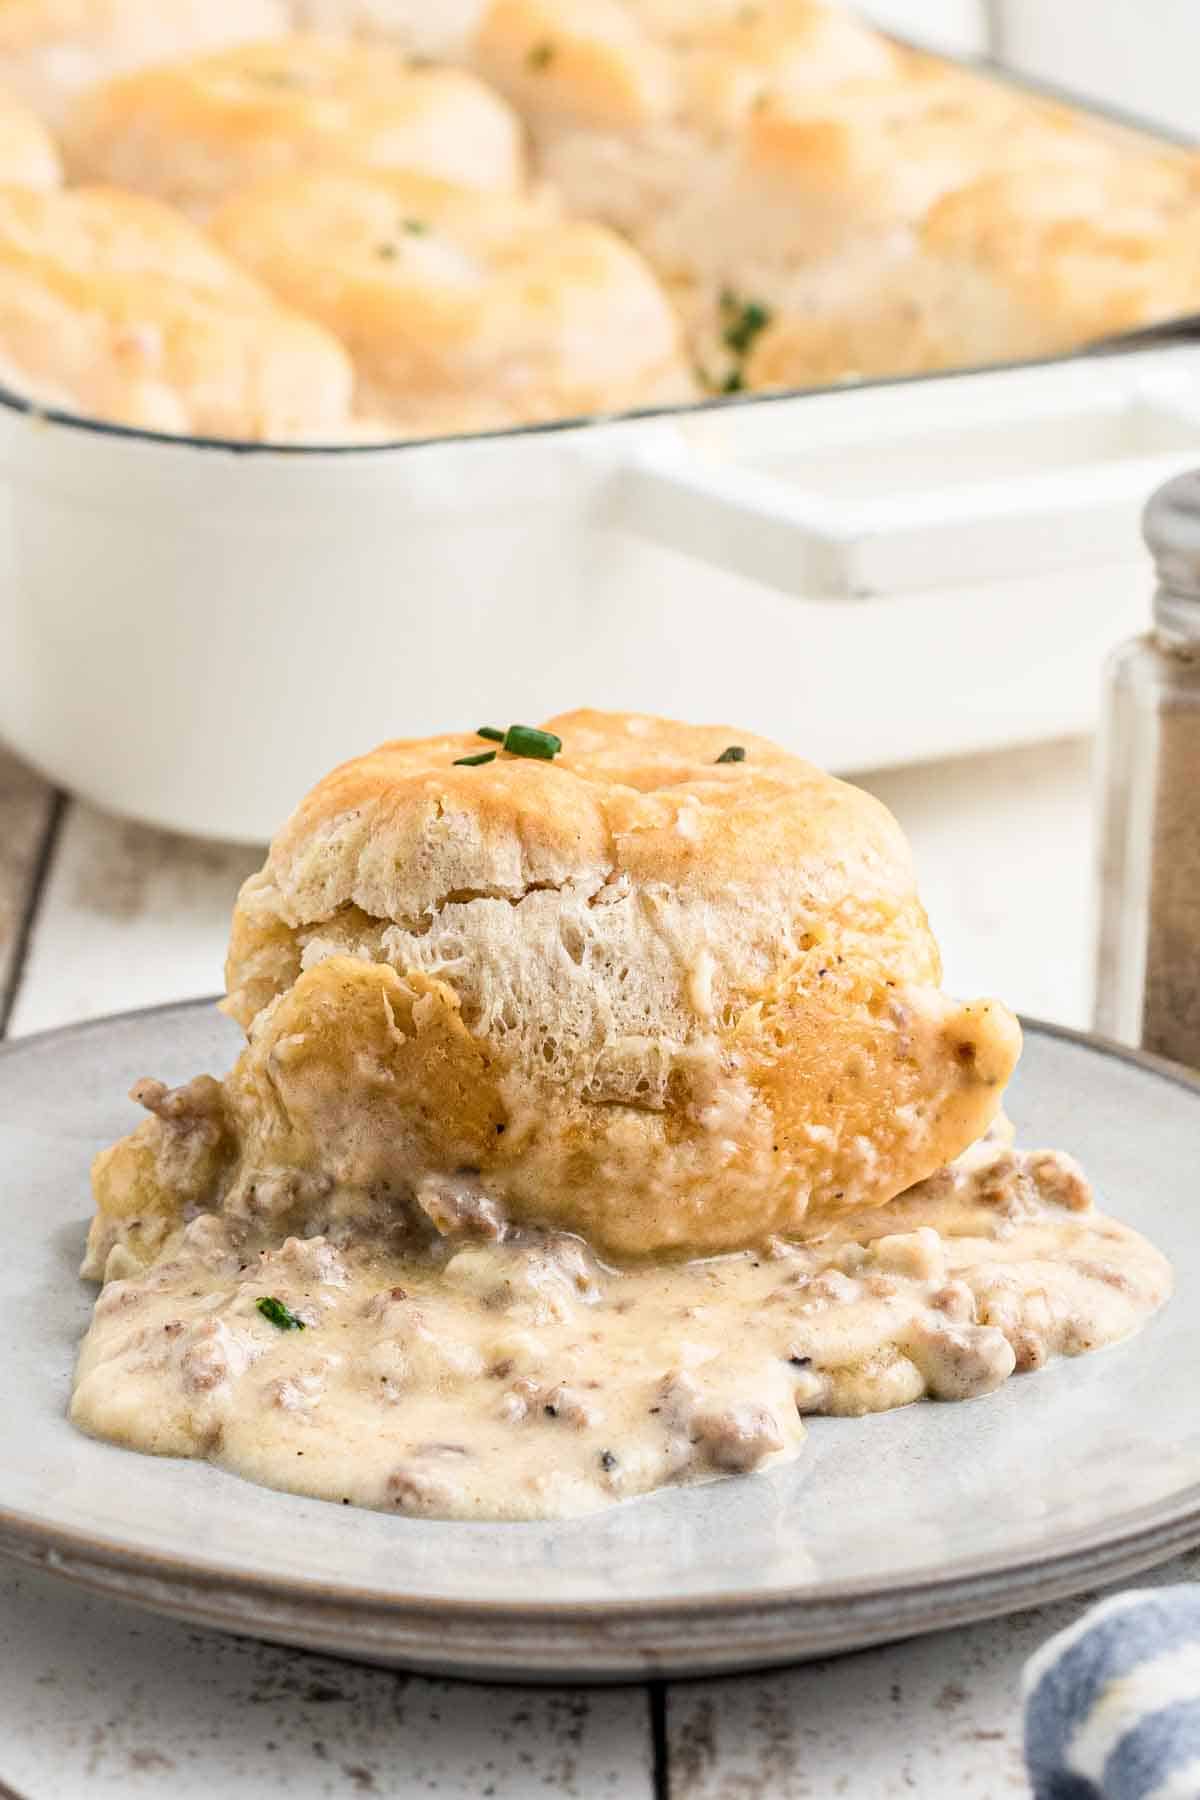 A plate with biscuits and gravy casserole on it.